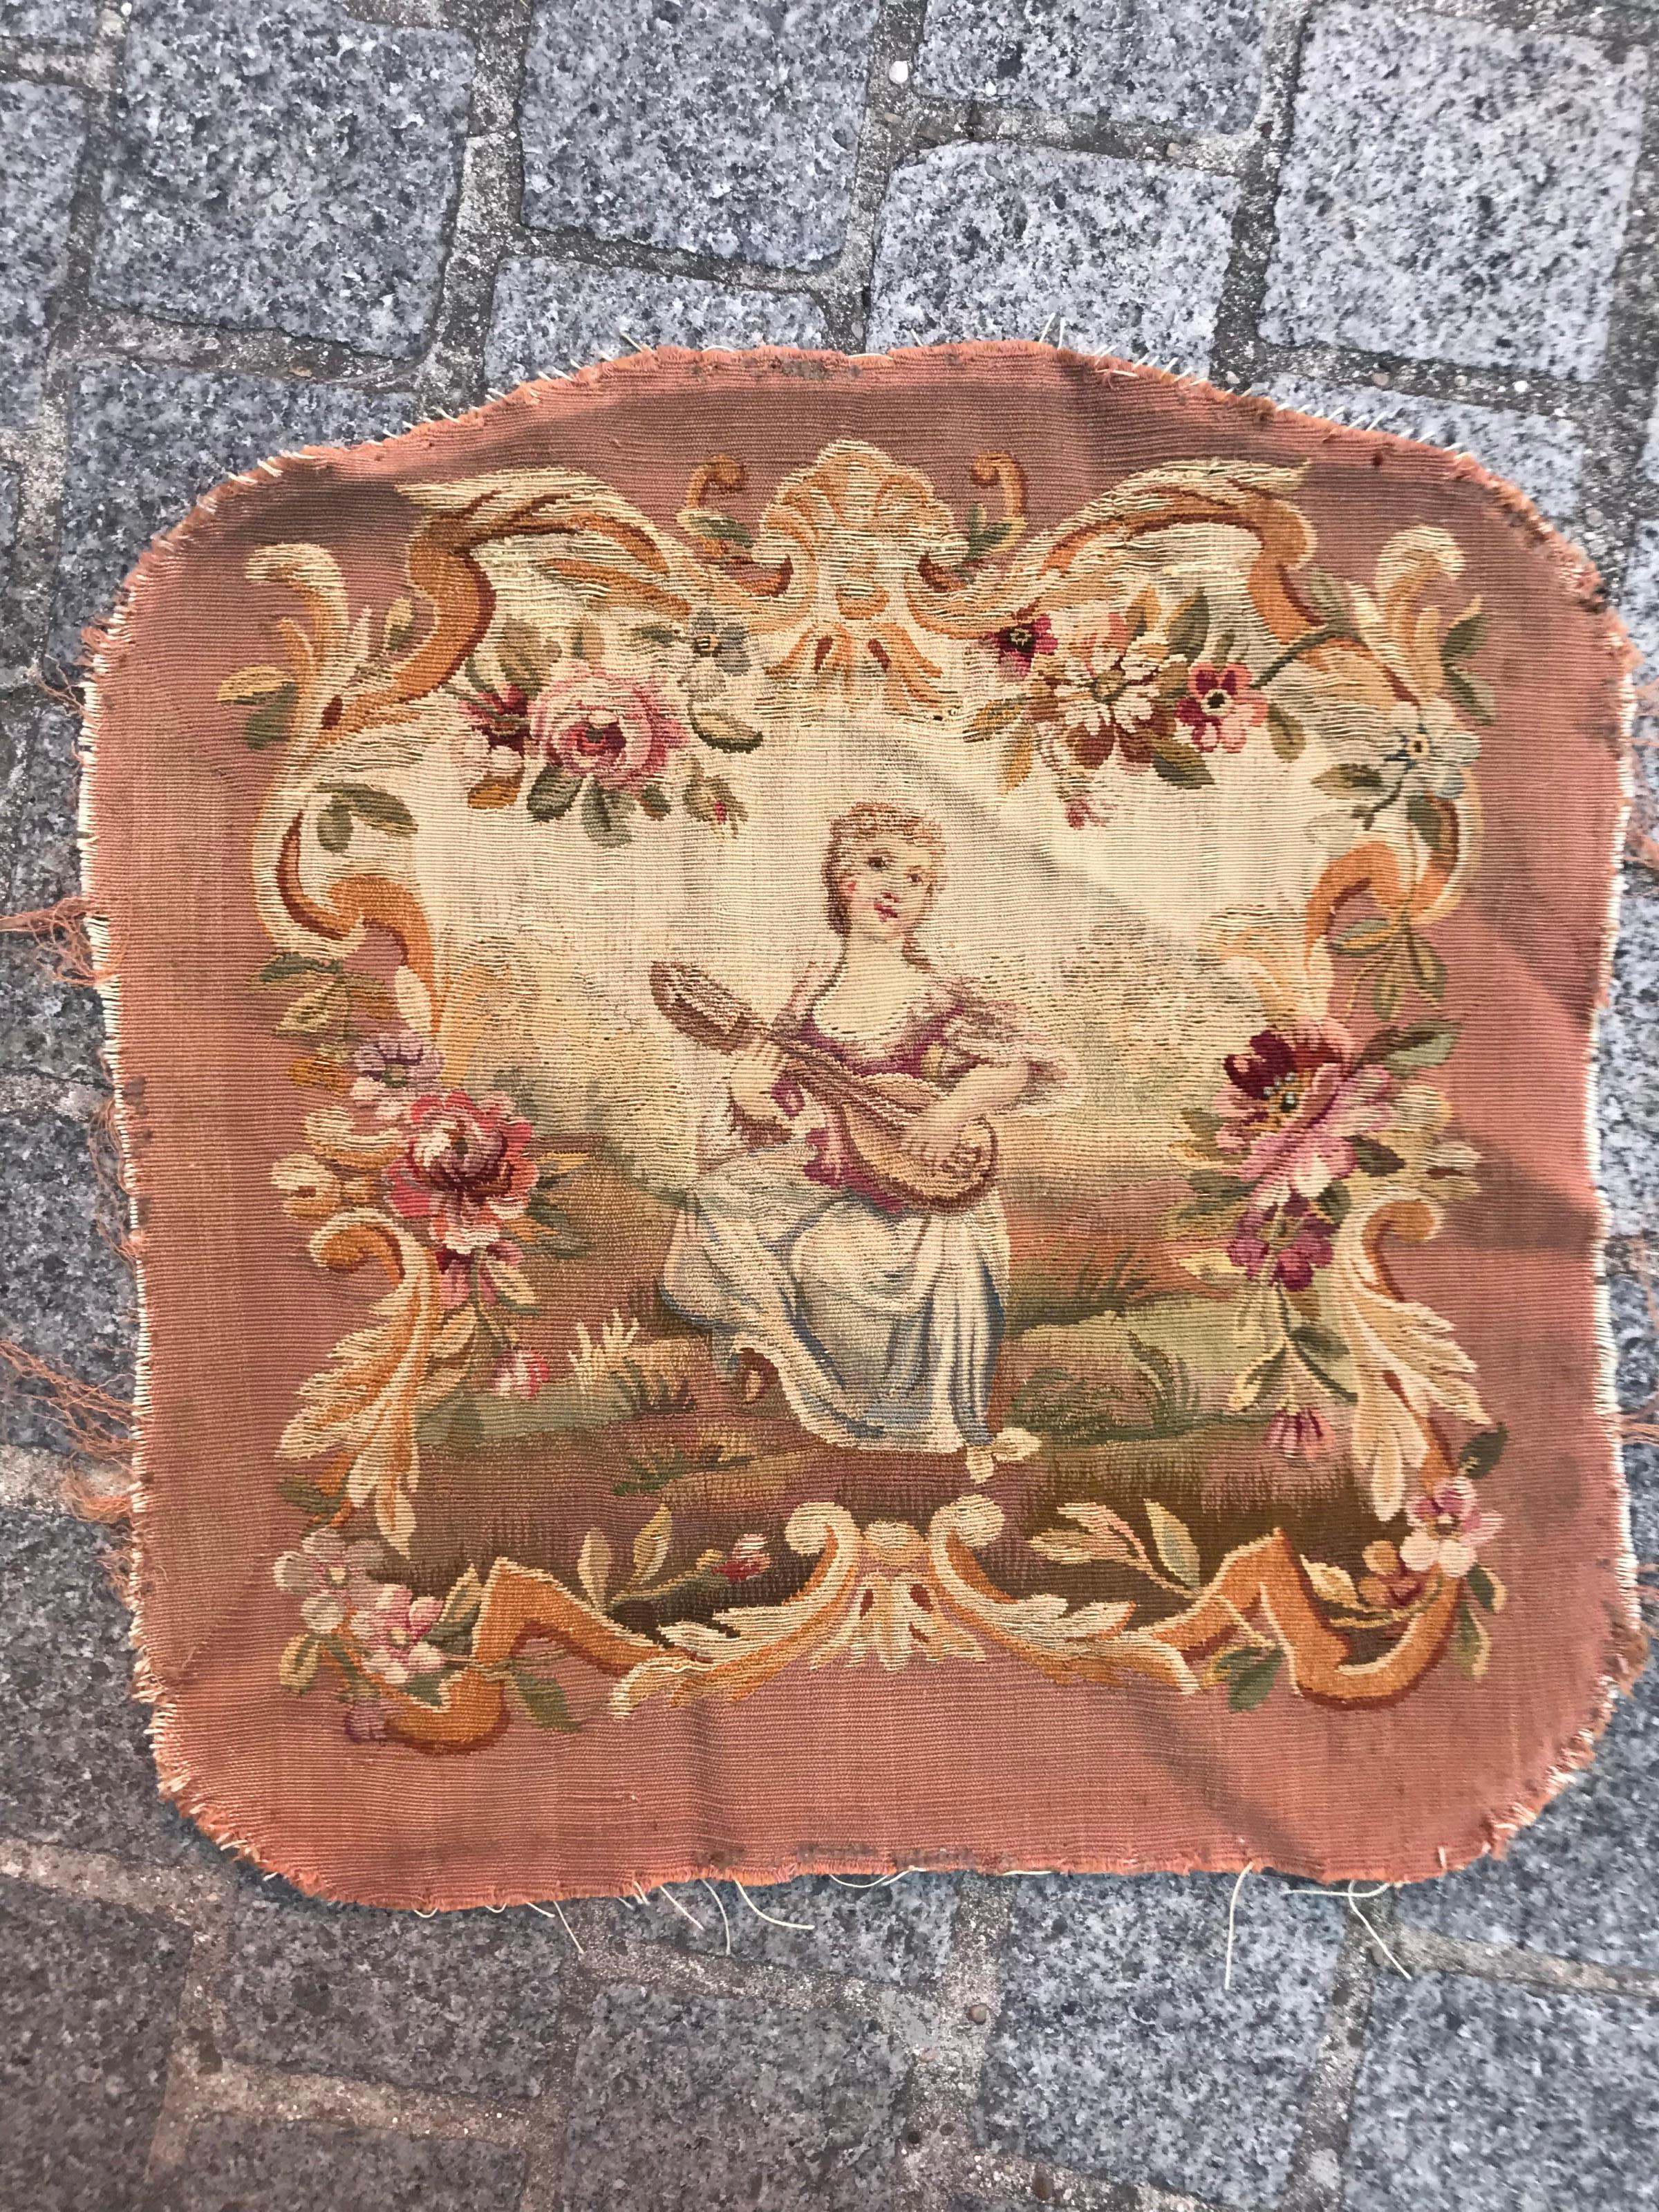 Very beautiful late 19th century Aubusson tapestry with a beautiful design and colors, wool and silk woven on cotton foundation.